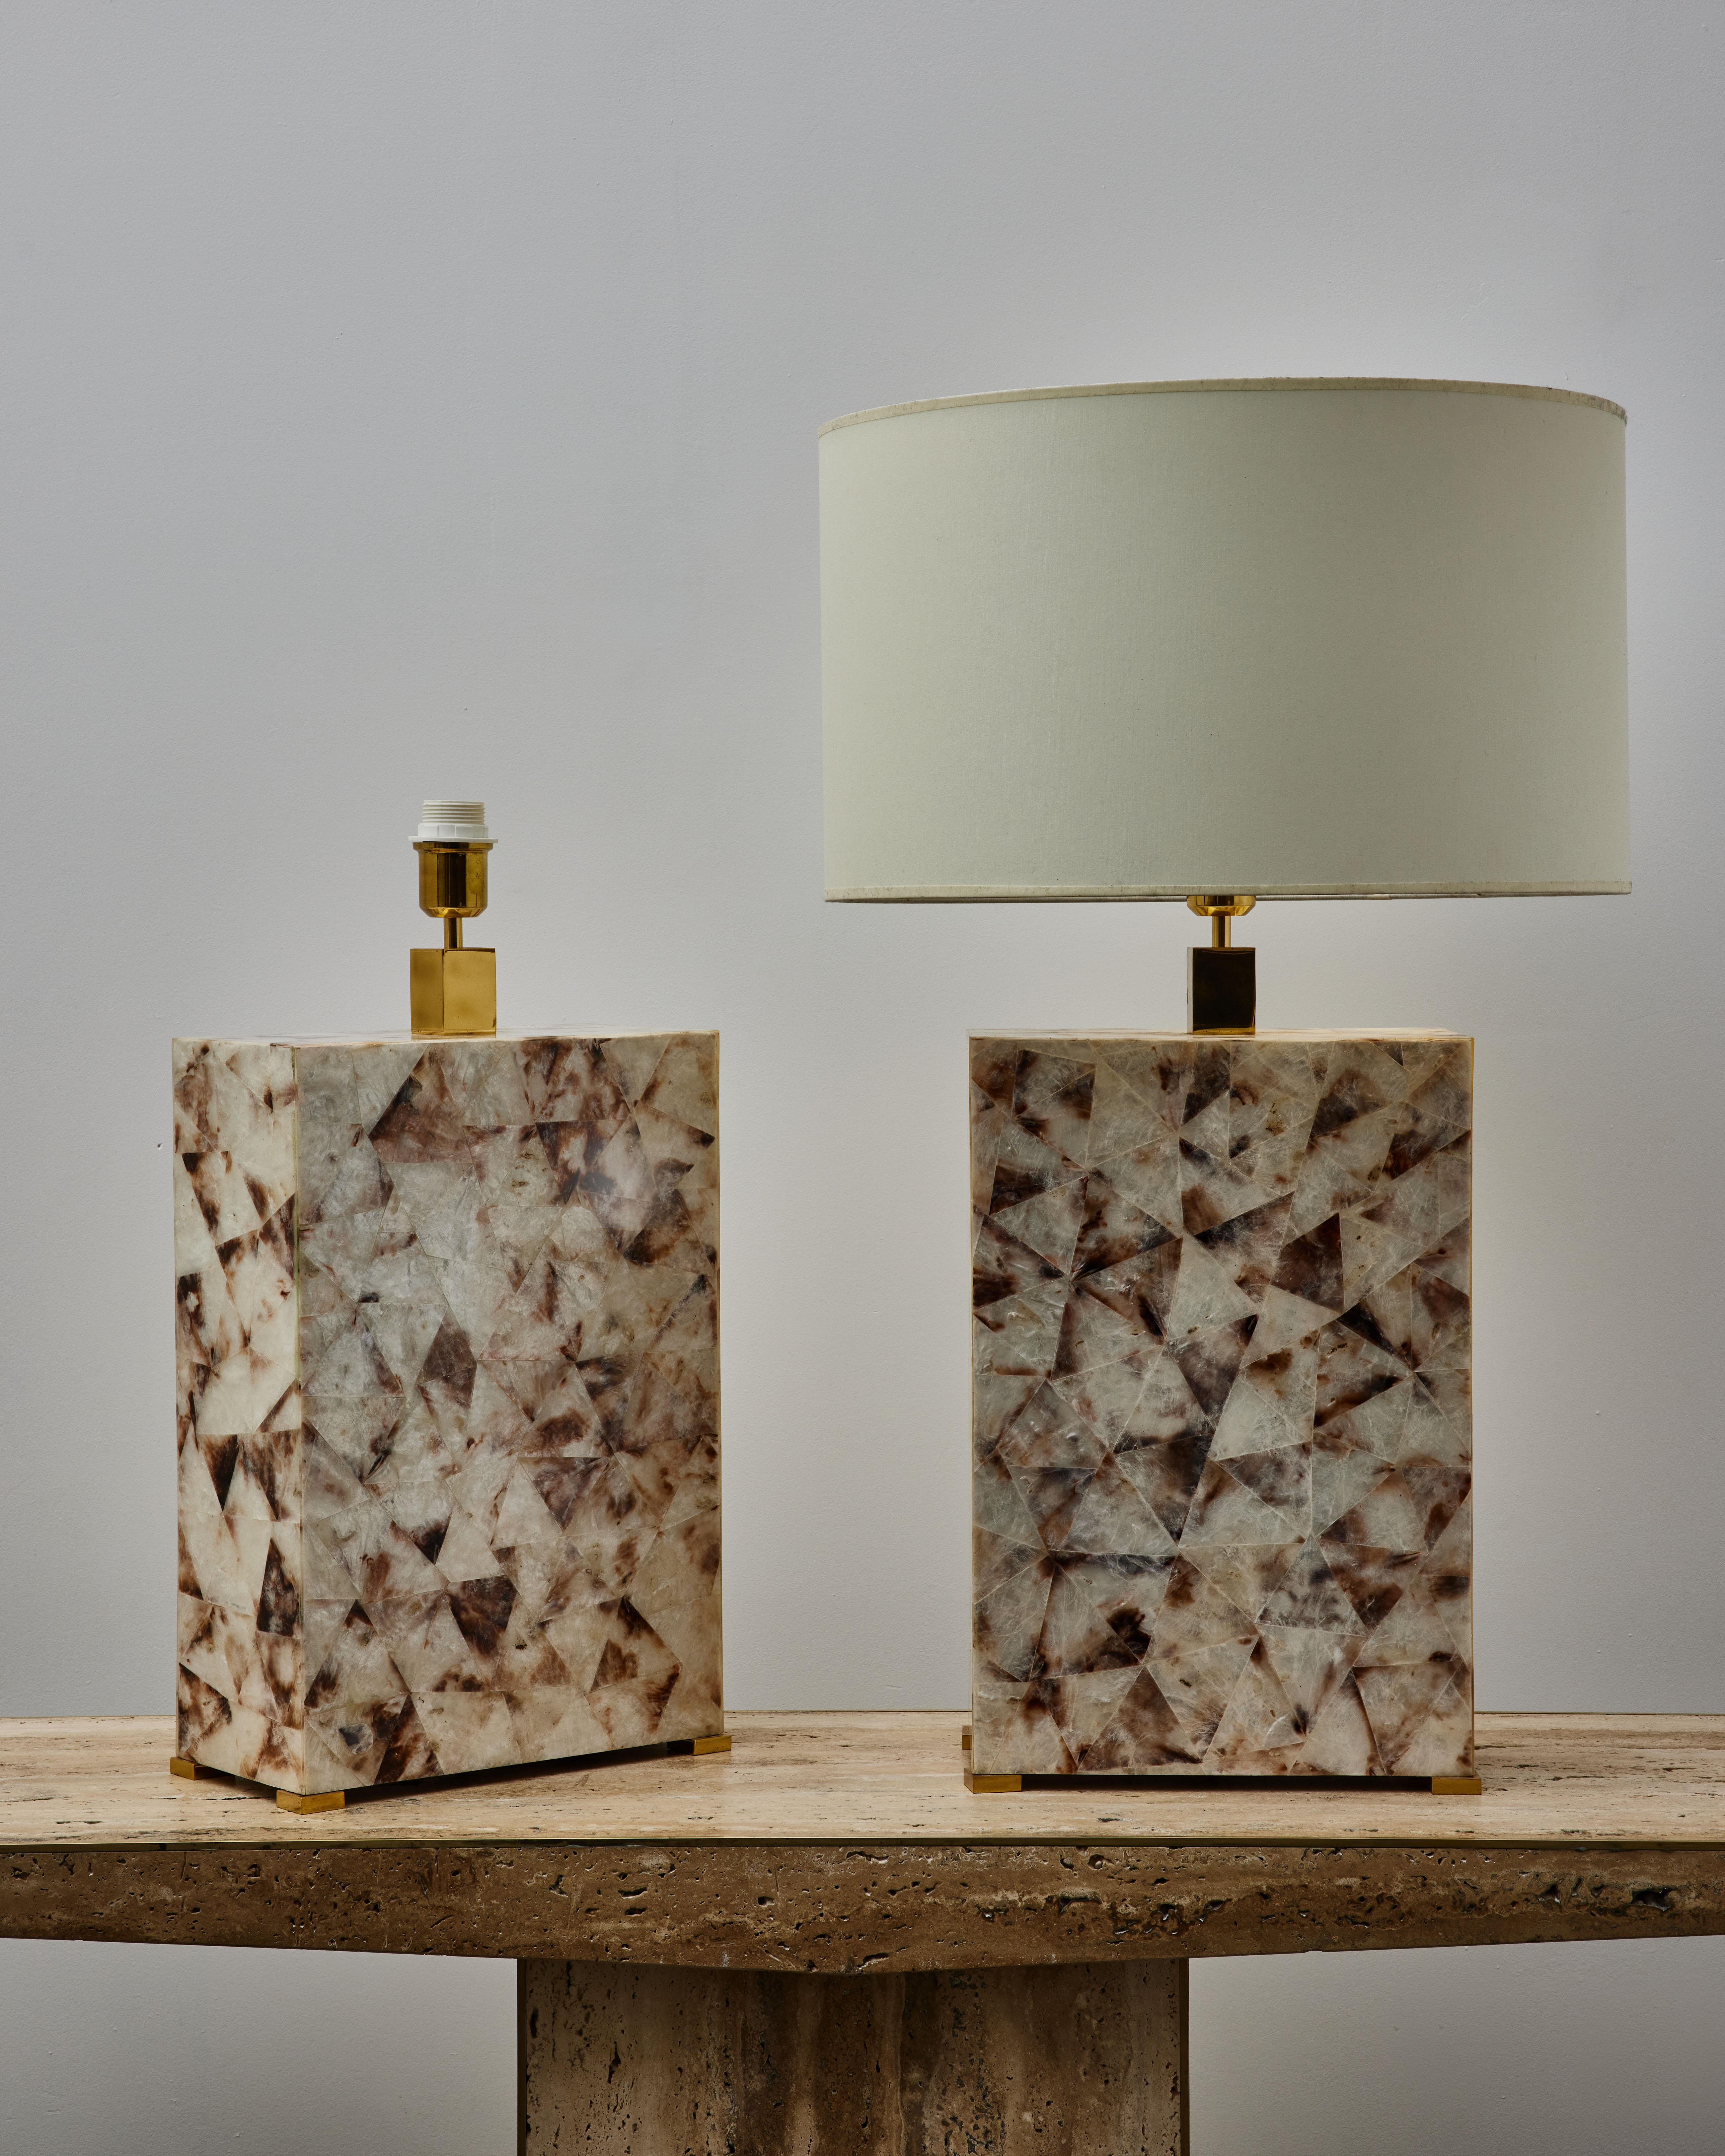 Pair of vintage tables lamps in mother of pearl marquetry.
Italy, 1980s

(Price and dimensions without shade).